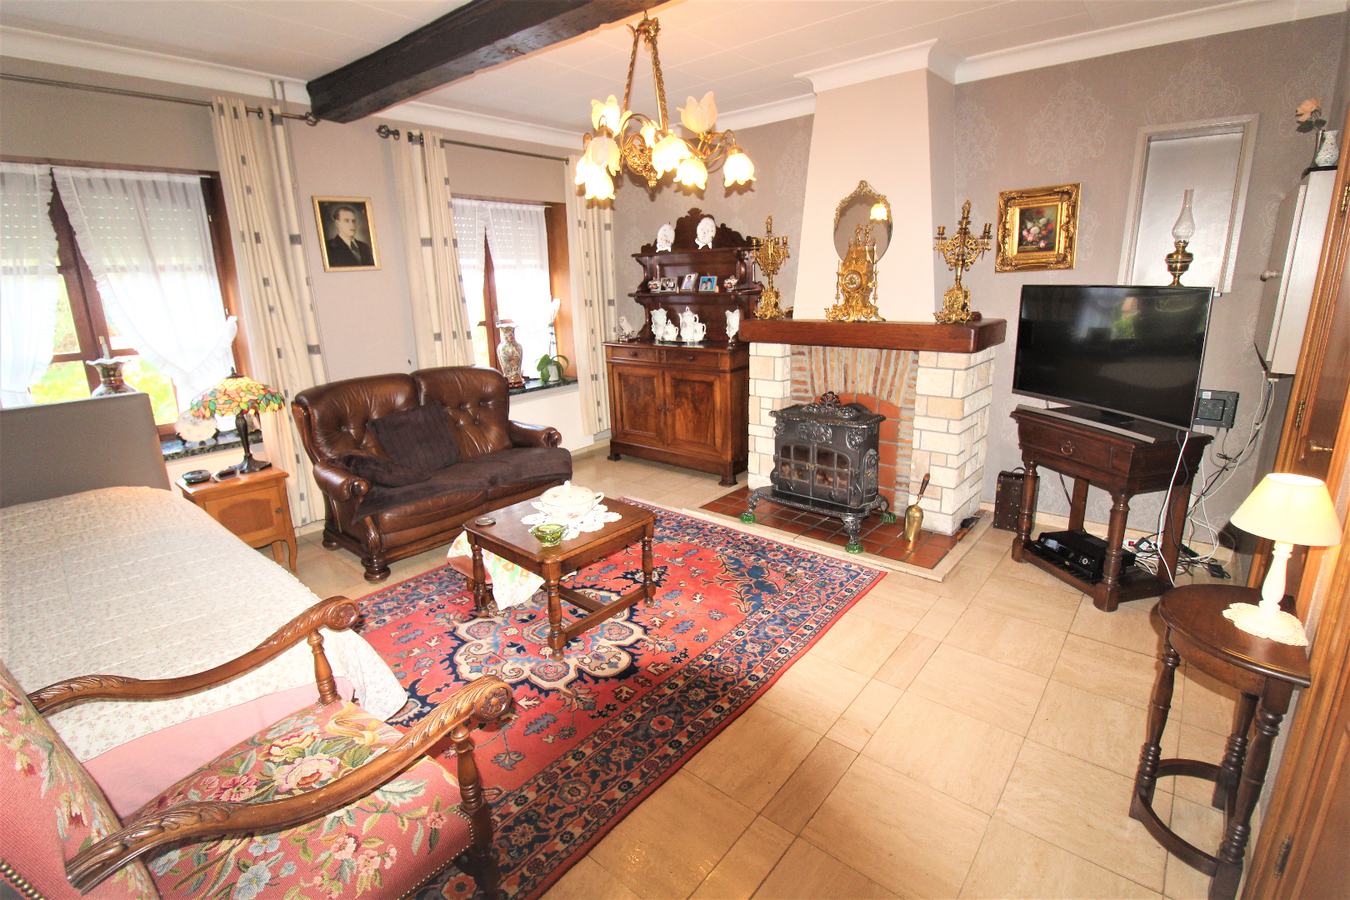 Property sold in Boutersem